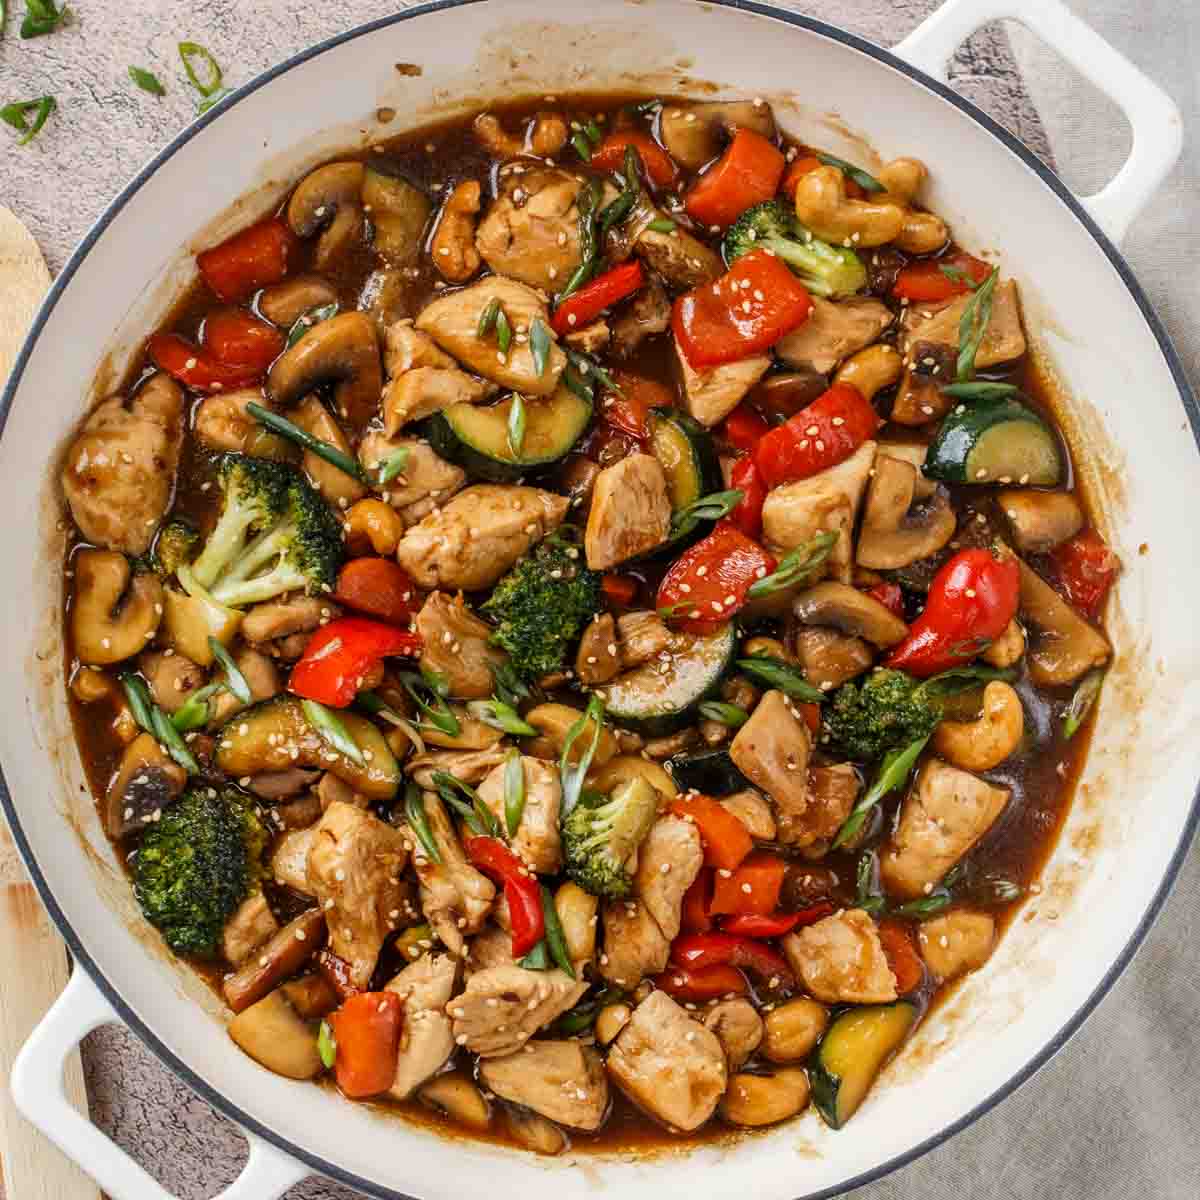 The skillet, now containing the sauce with  the chicken, and vegetables. 